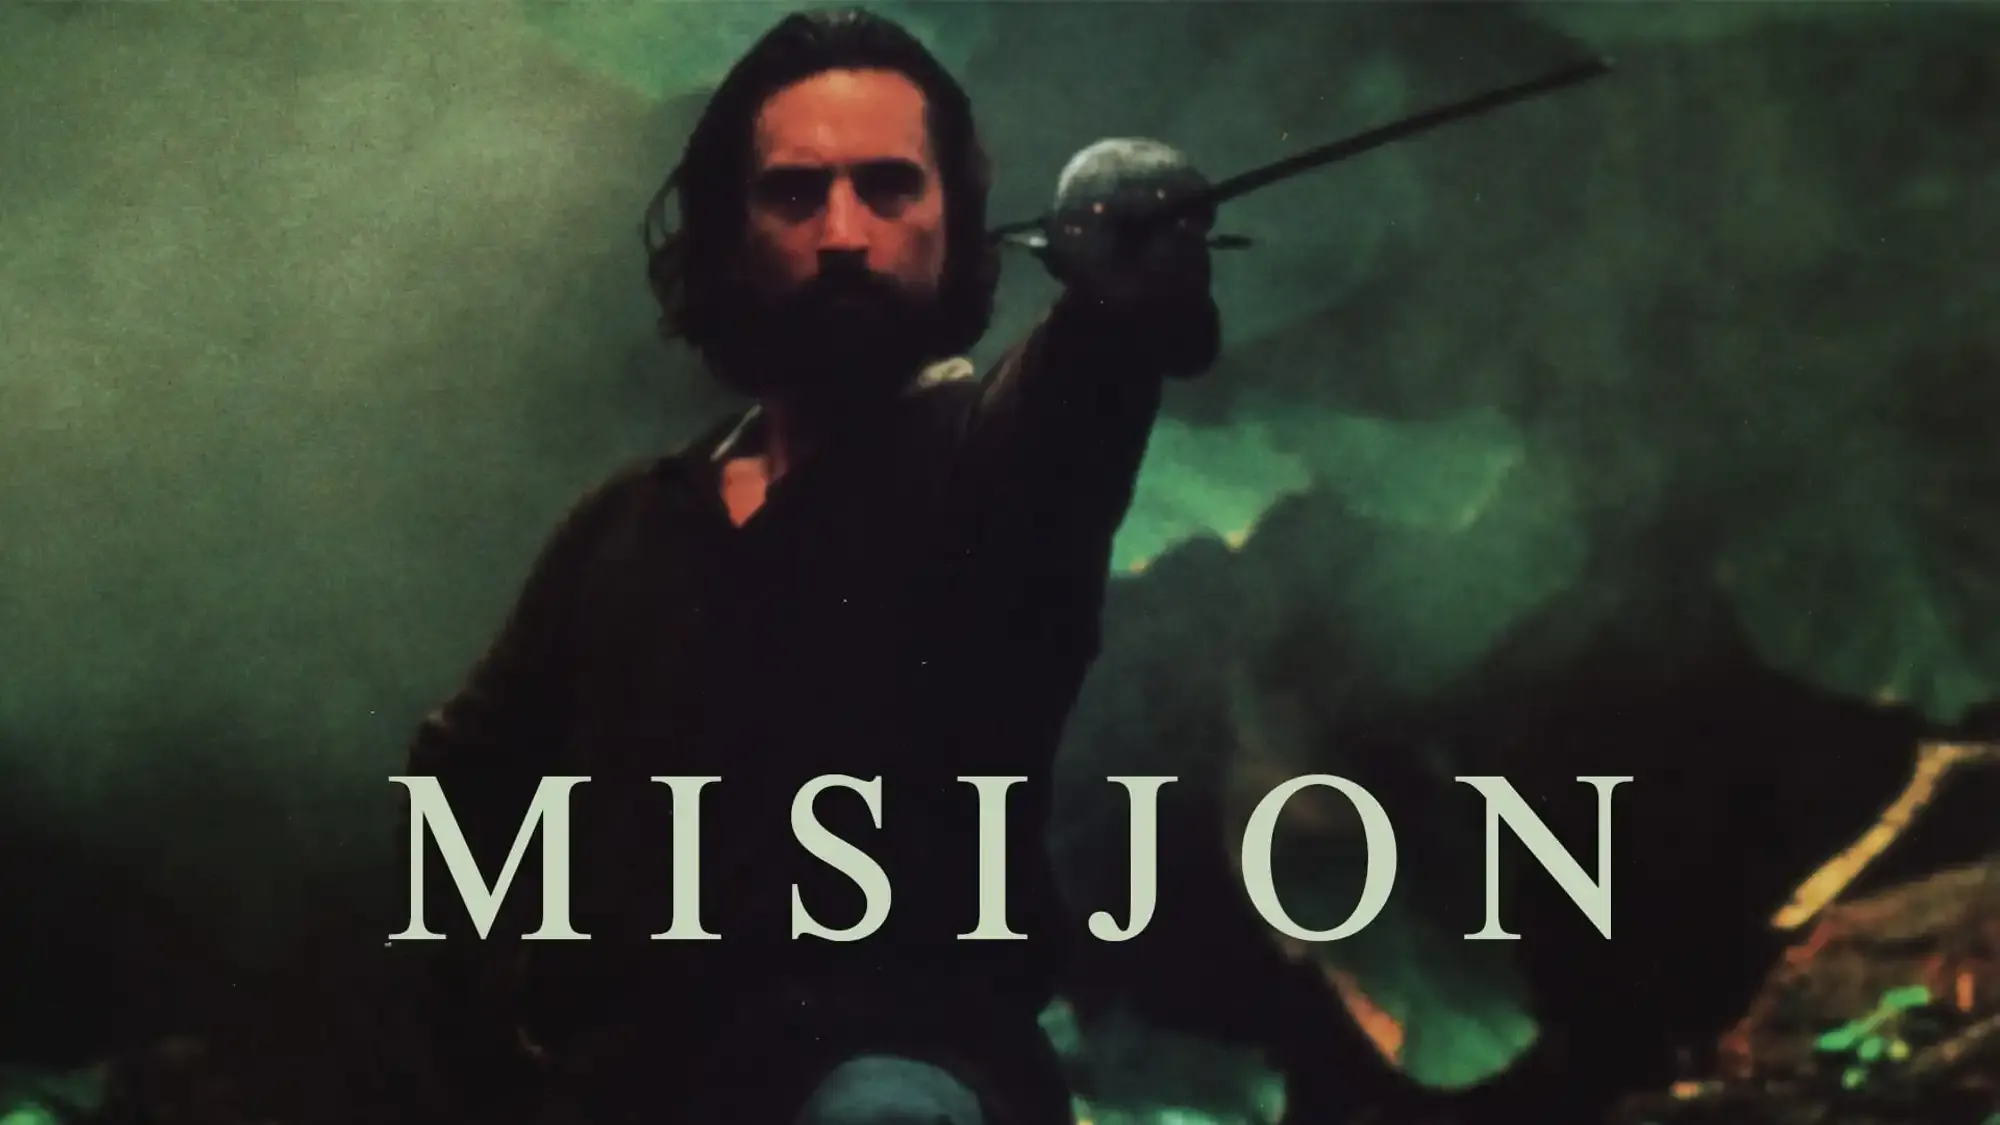 The Mission movie review